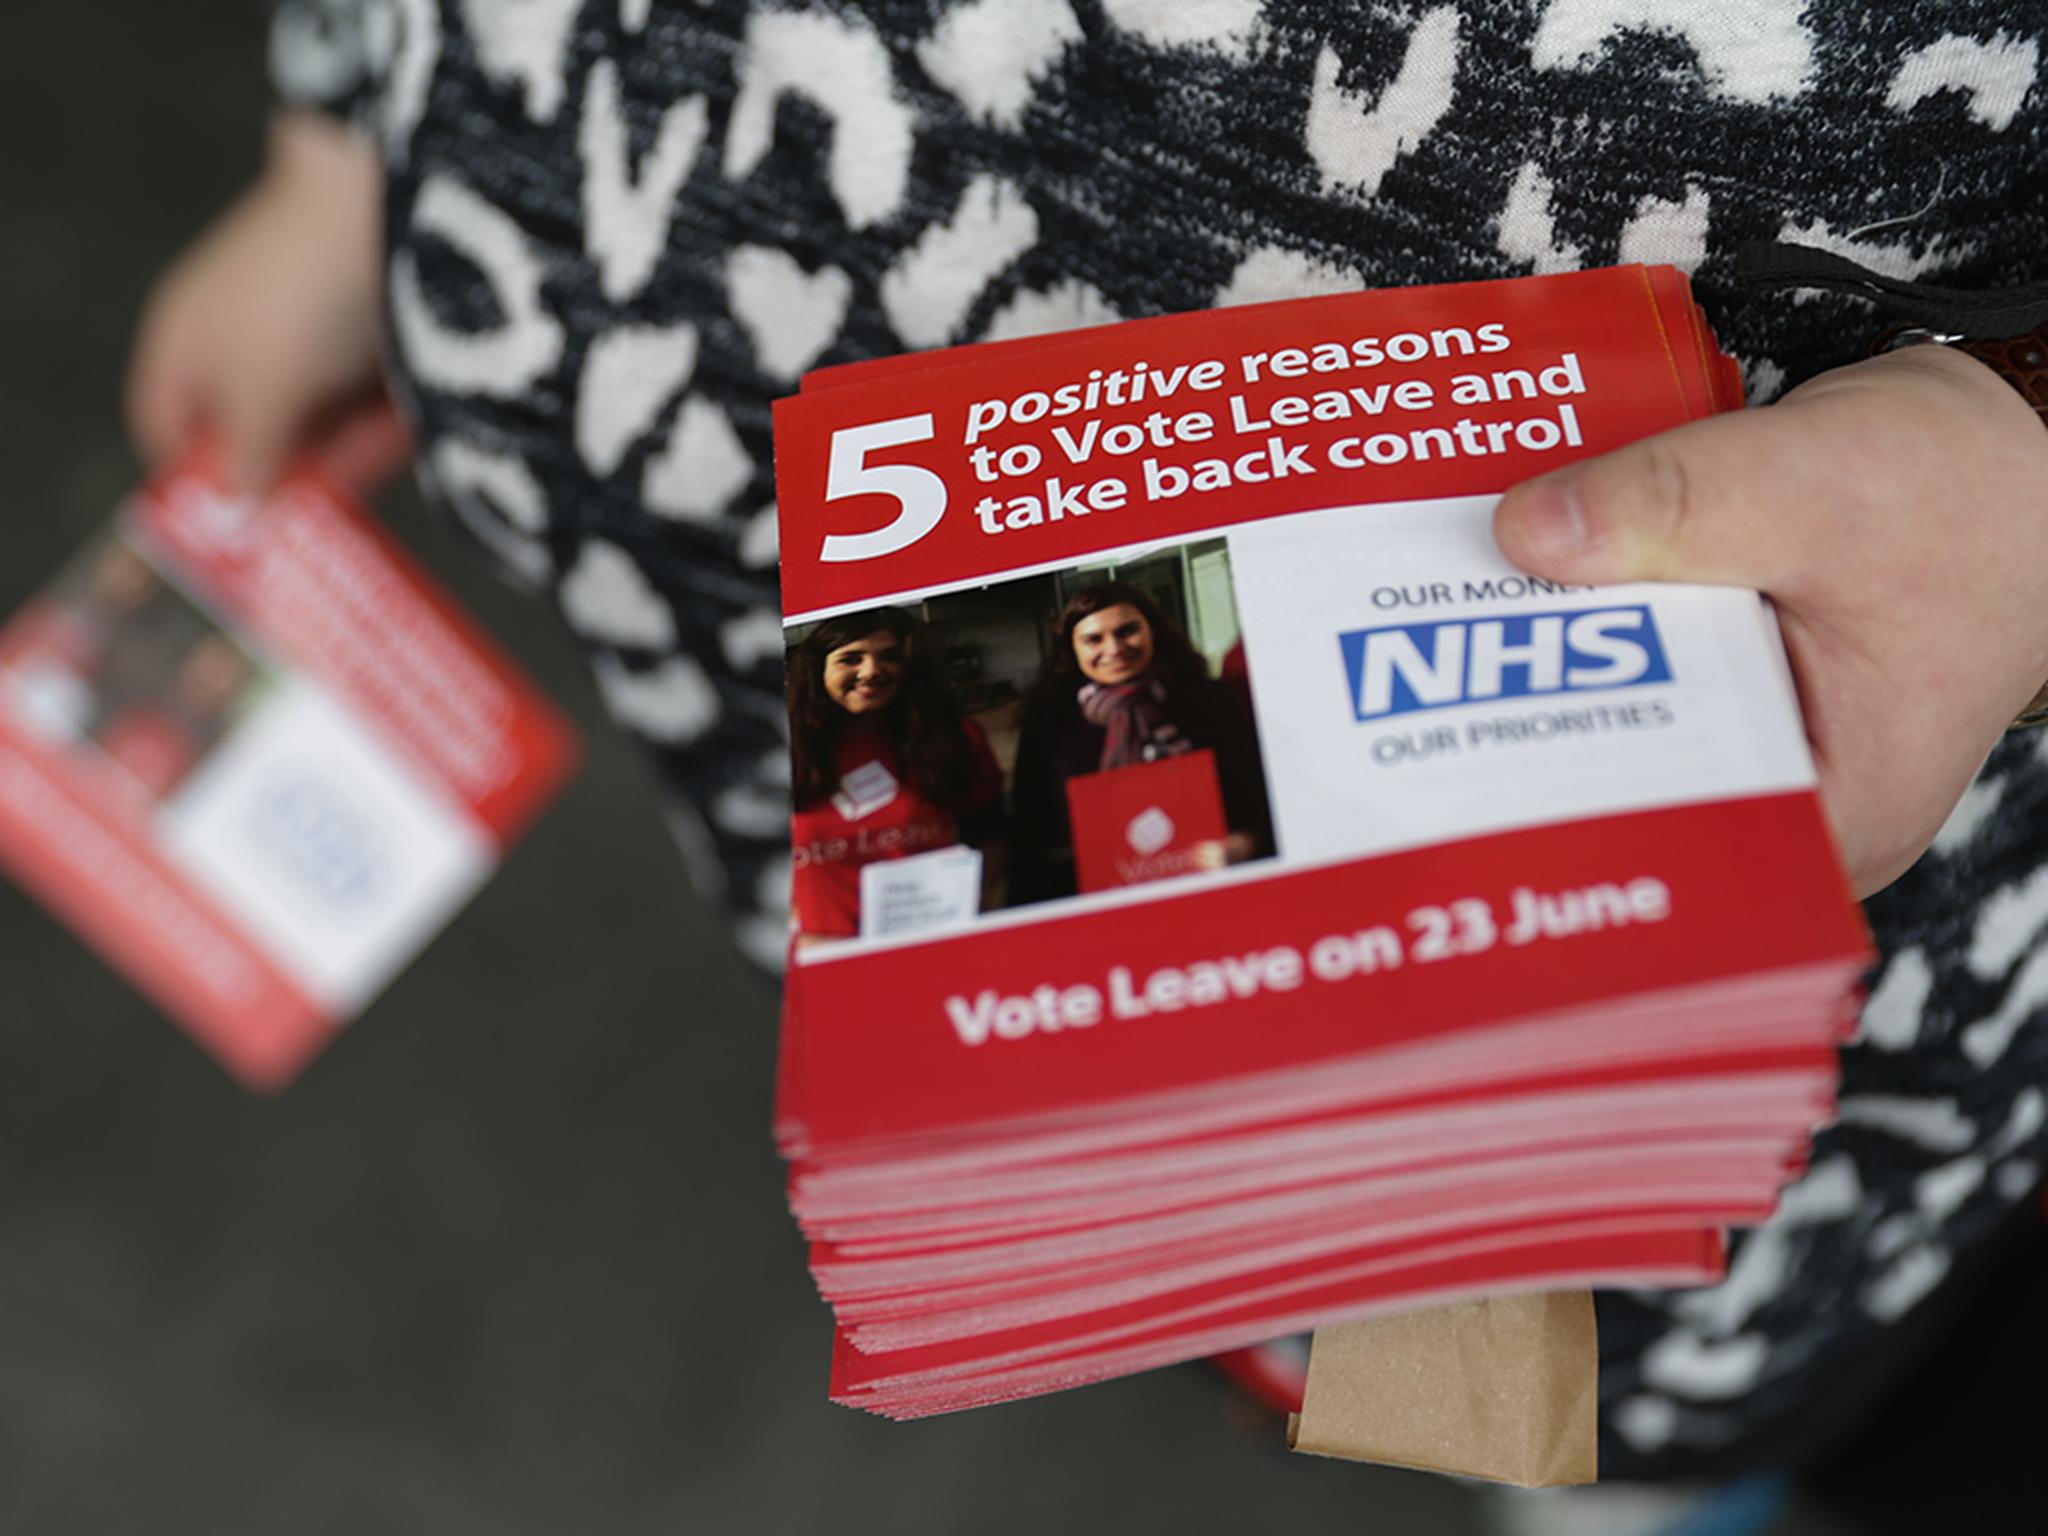 The Vote Leave campaign has also come under fire for using the NHS logo without permission